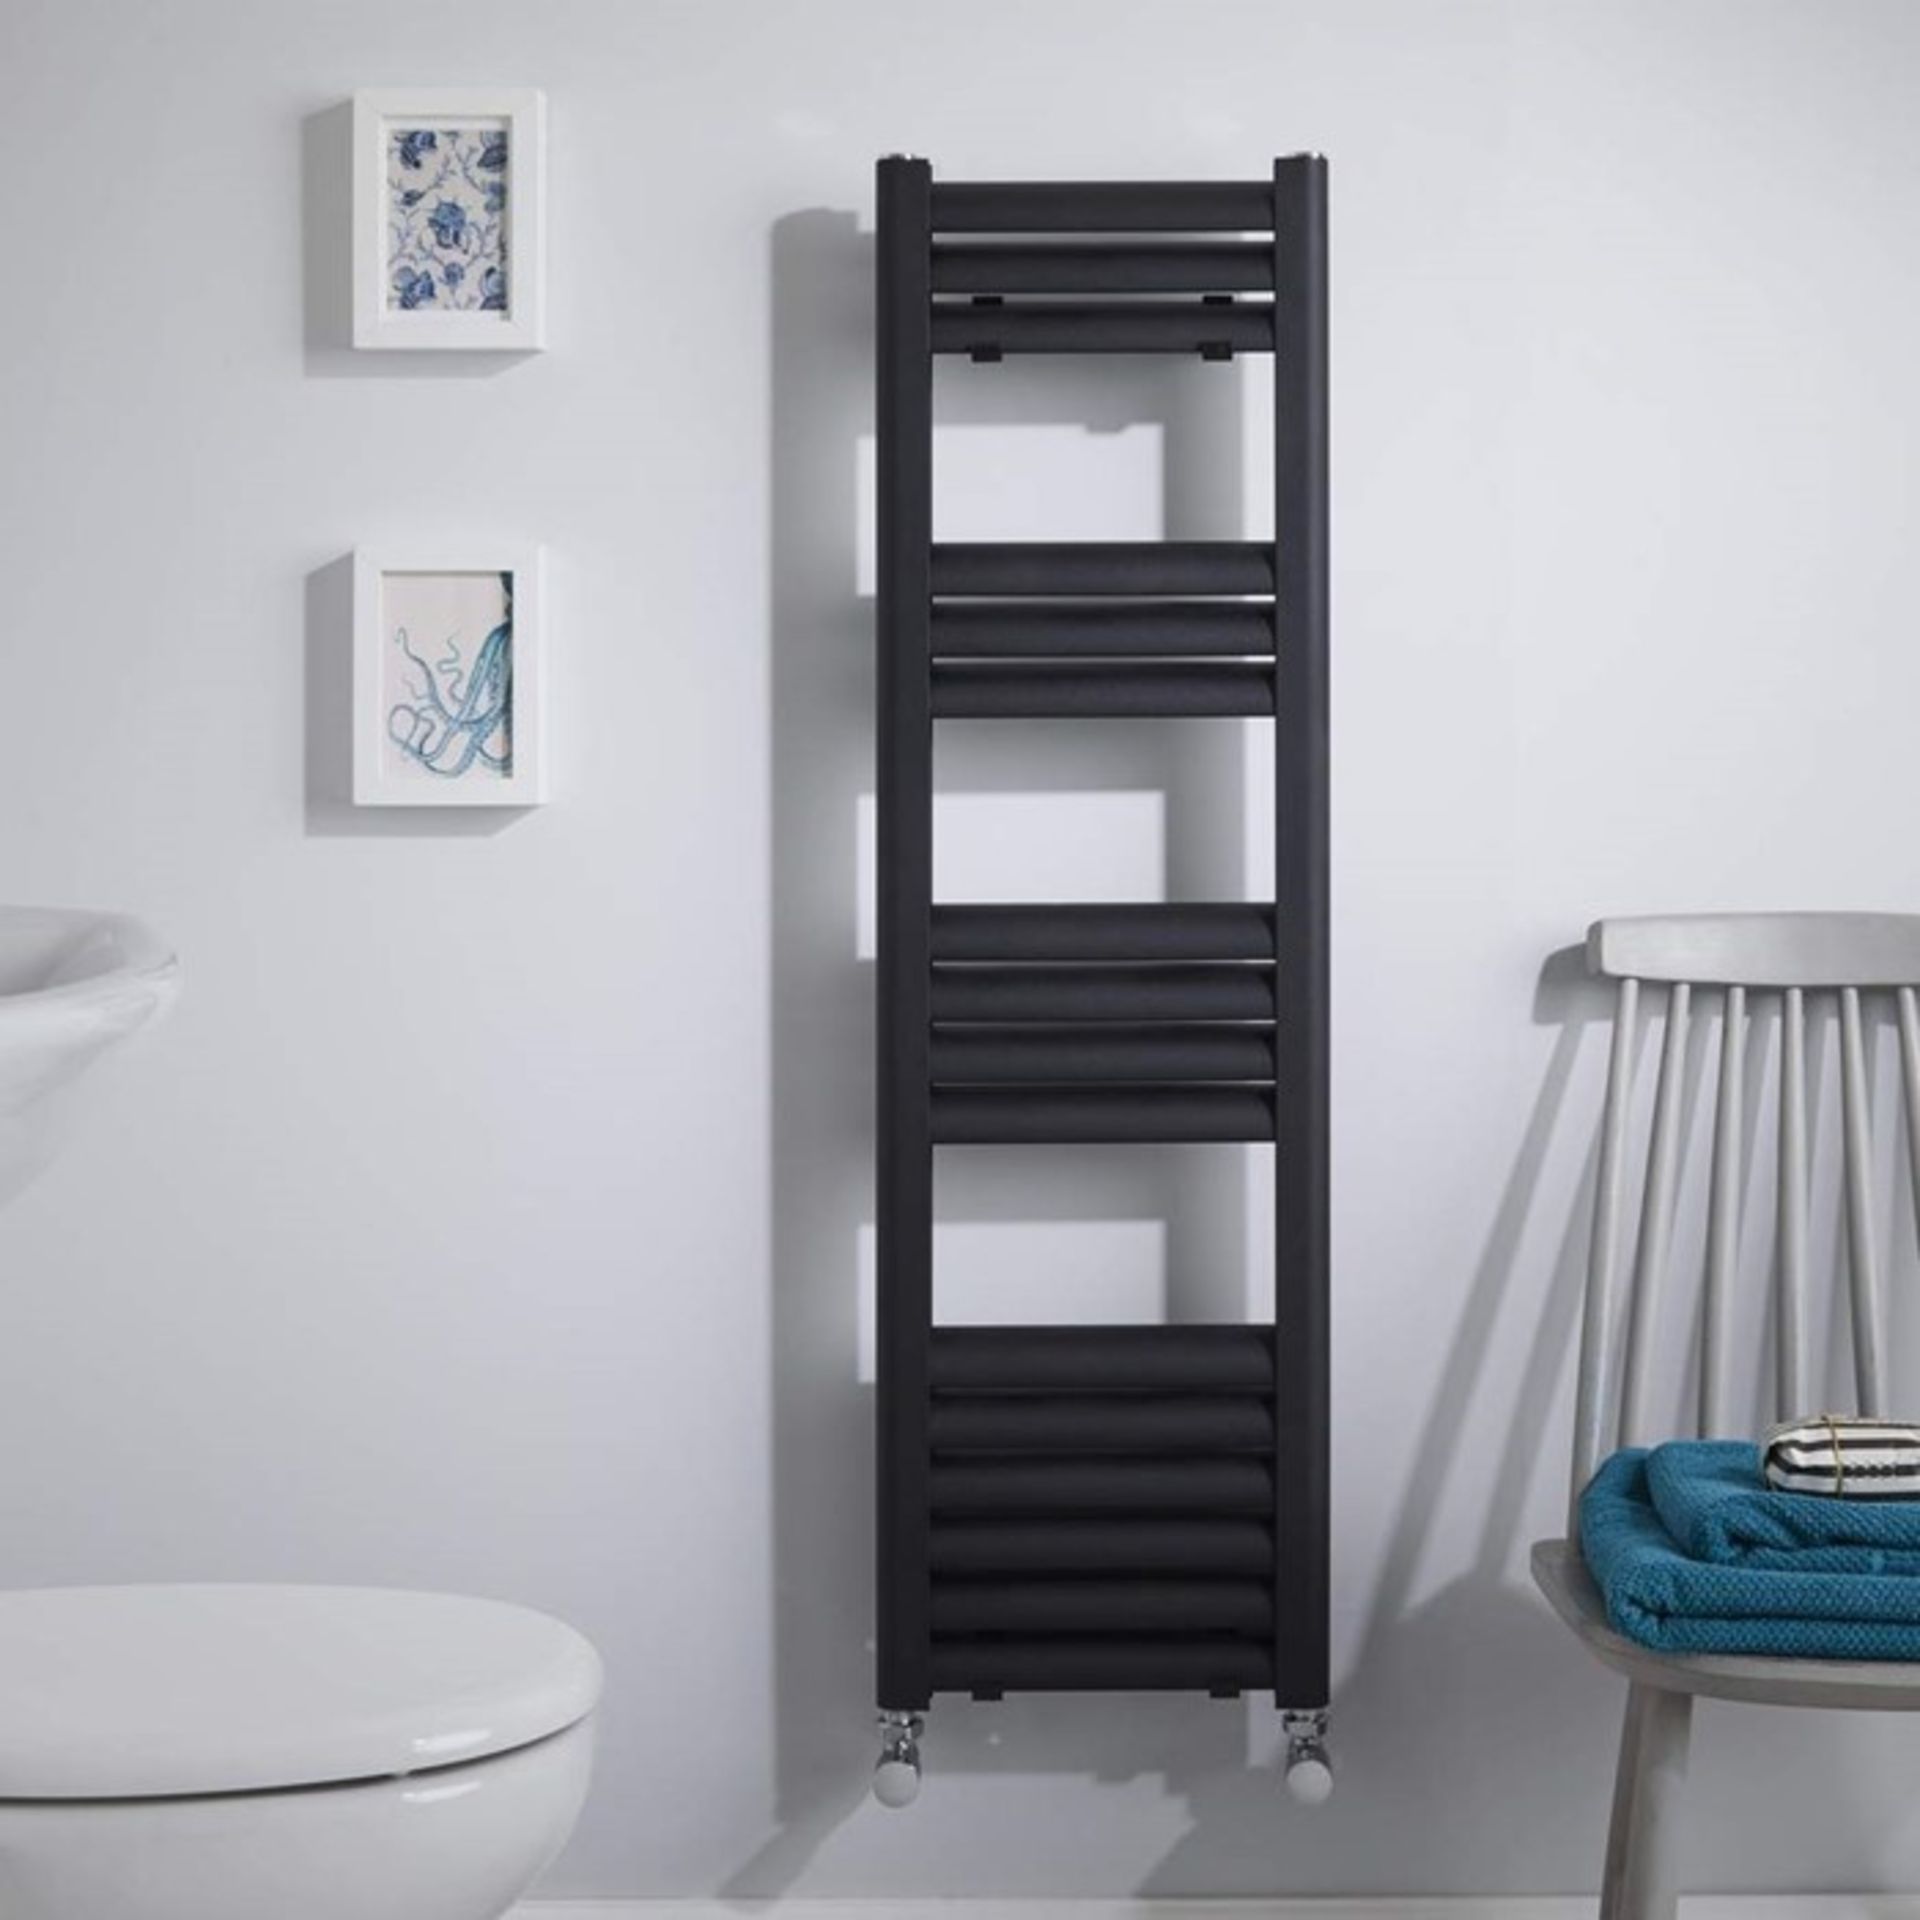 Anthracite H1214 aluminium tall radiator, 1800 x 300mm, unchecked and boxed.